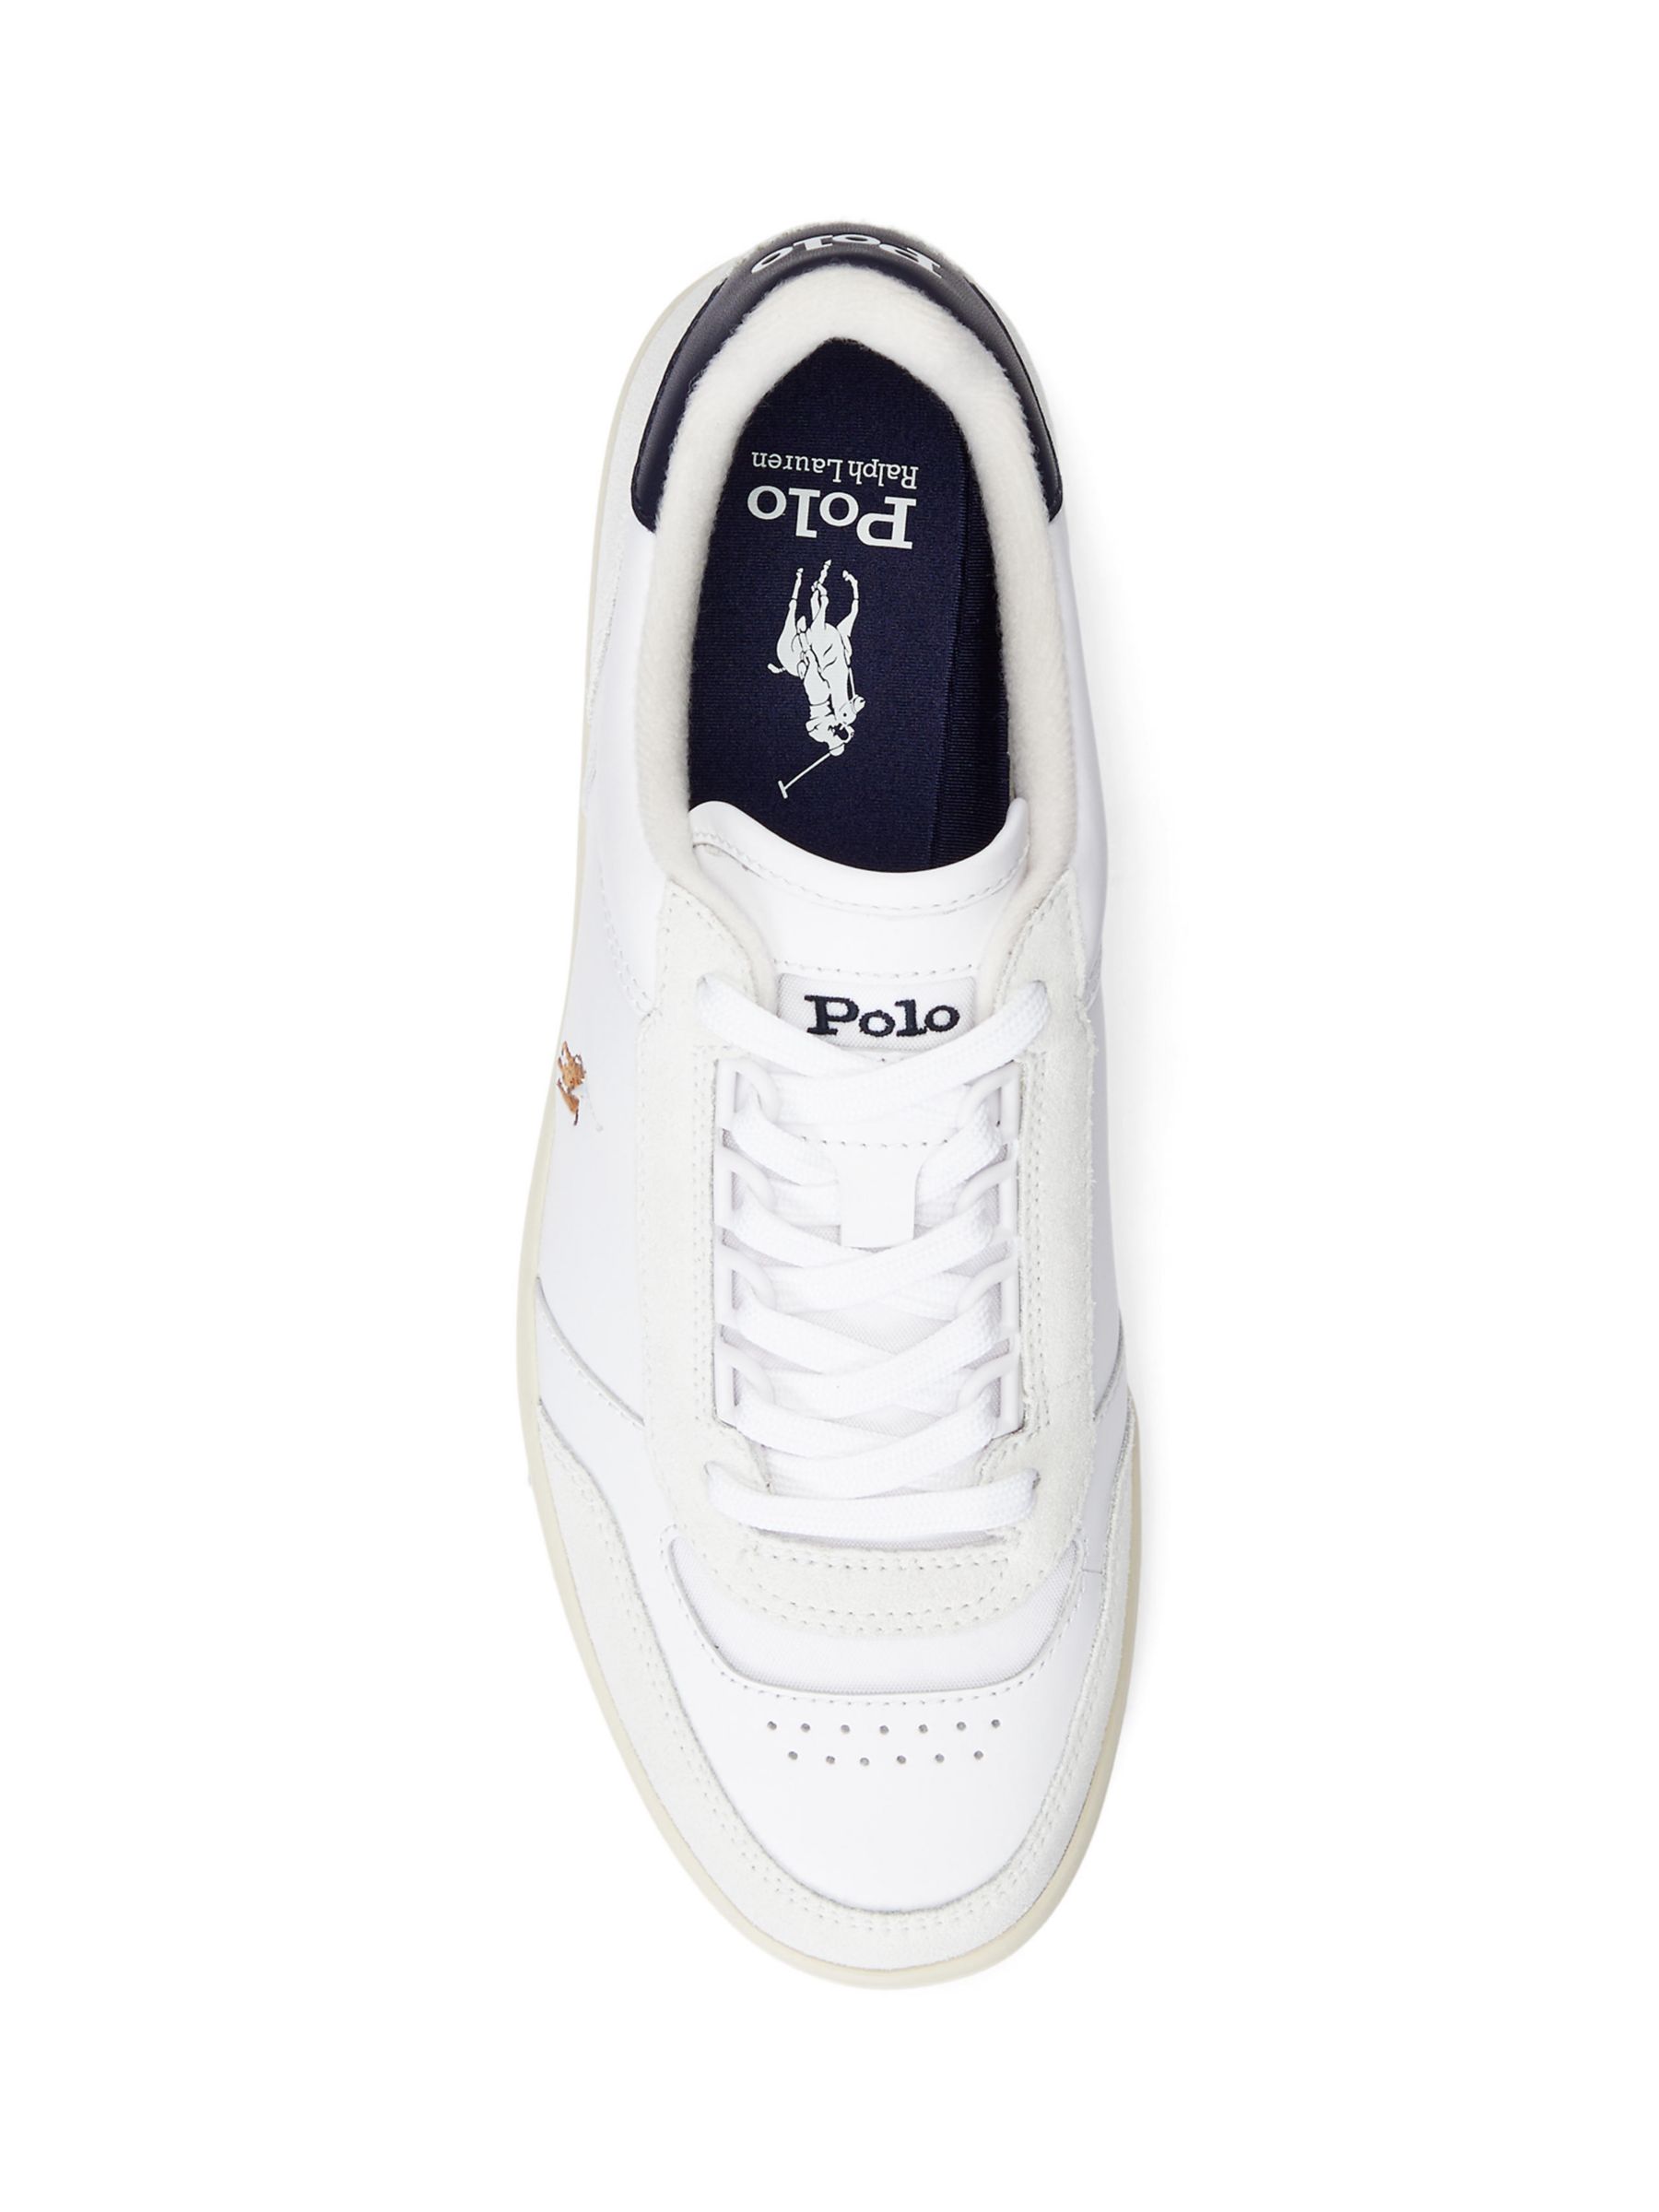 Ralph Lauren Polo Leather Suede Court Trainers, White/Navy, 7